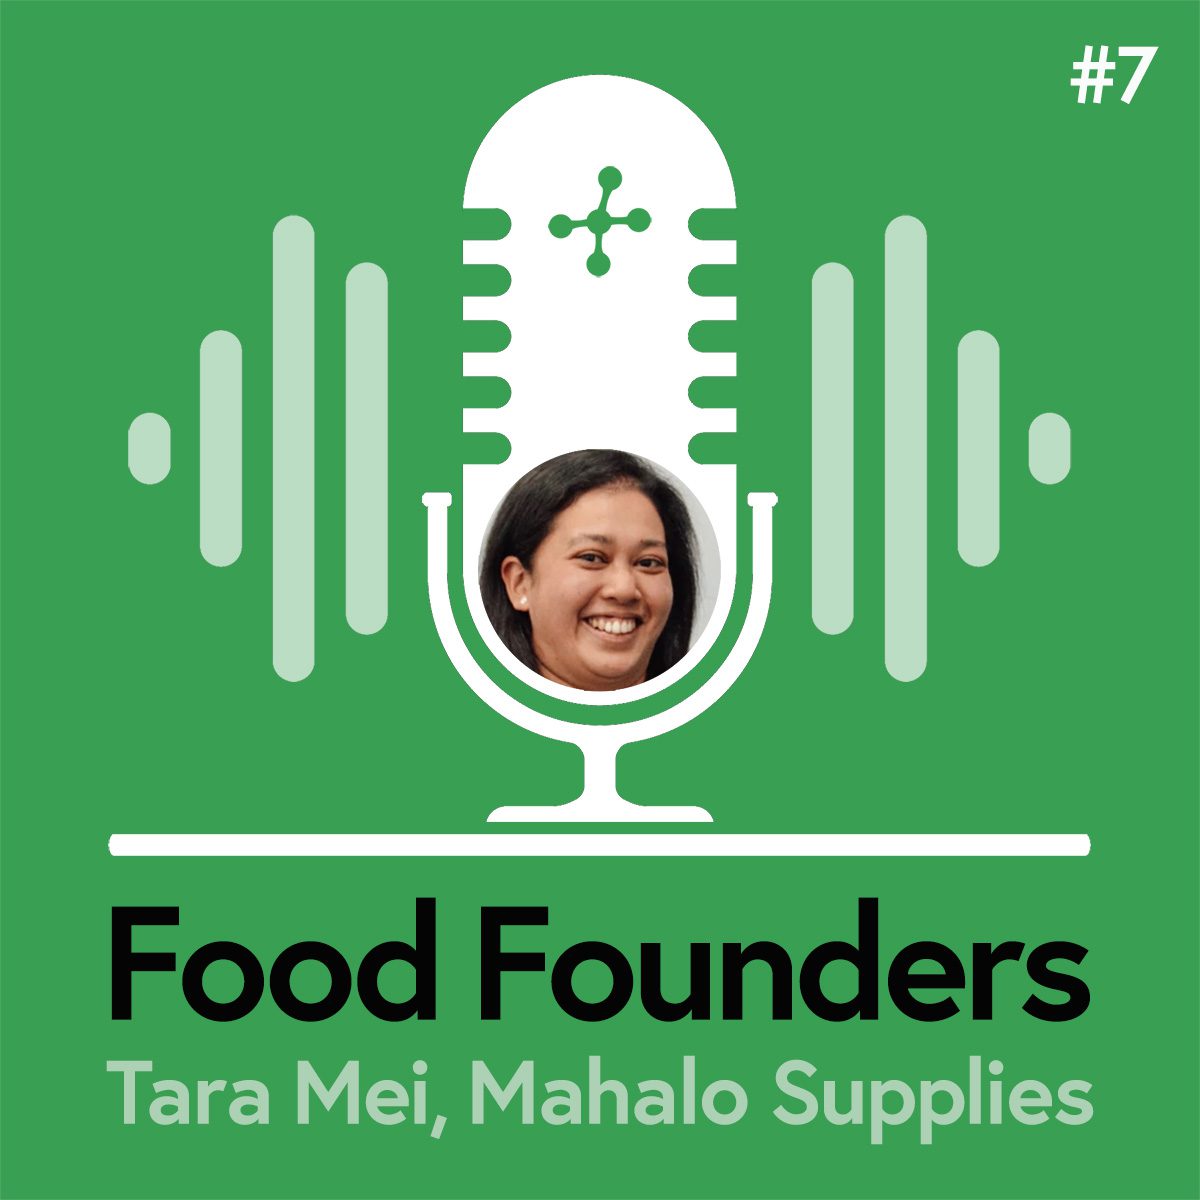 Tara Mei, Mahalo Supplies - Froghop Food Founders Interview